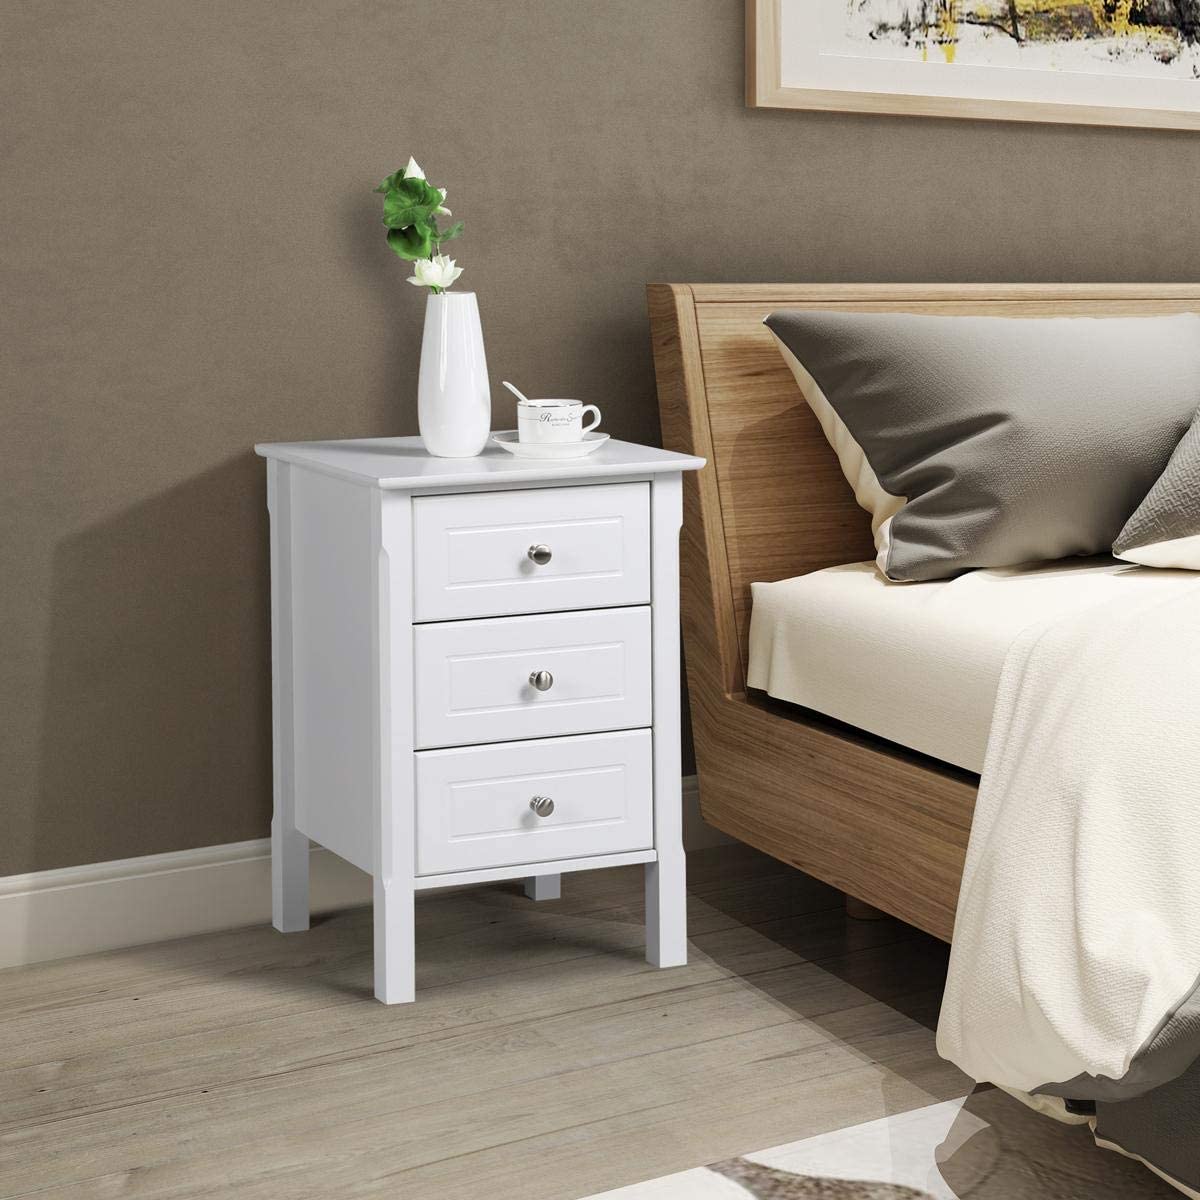 Campton Black Bedside Table with 3 Drawers